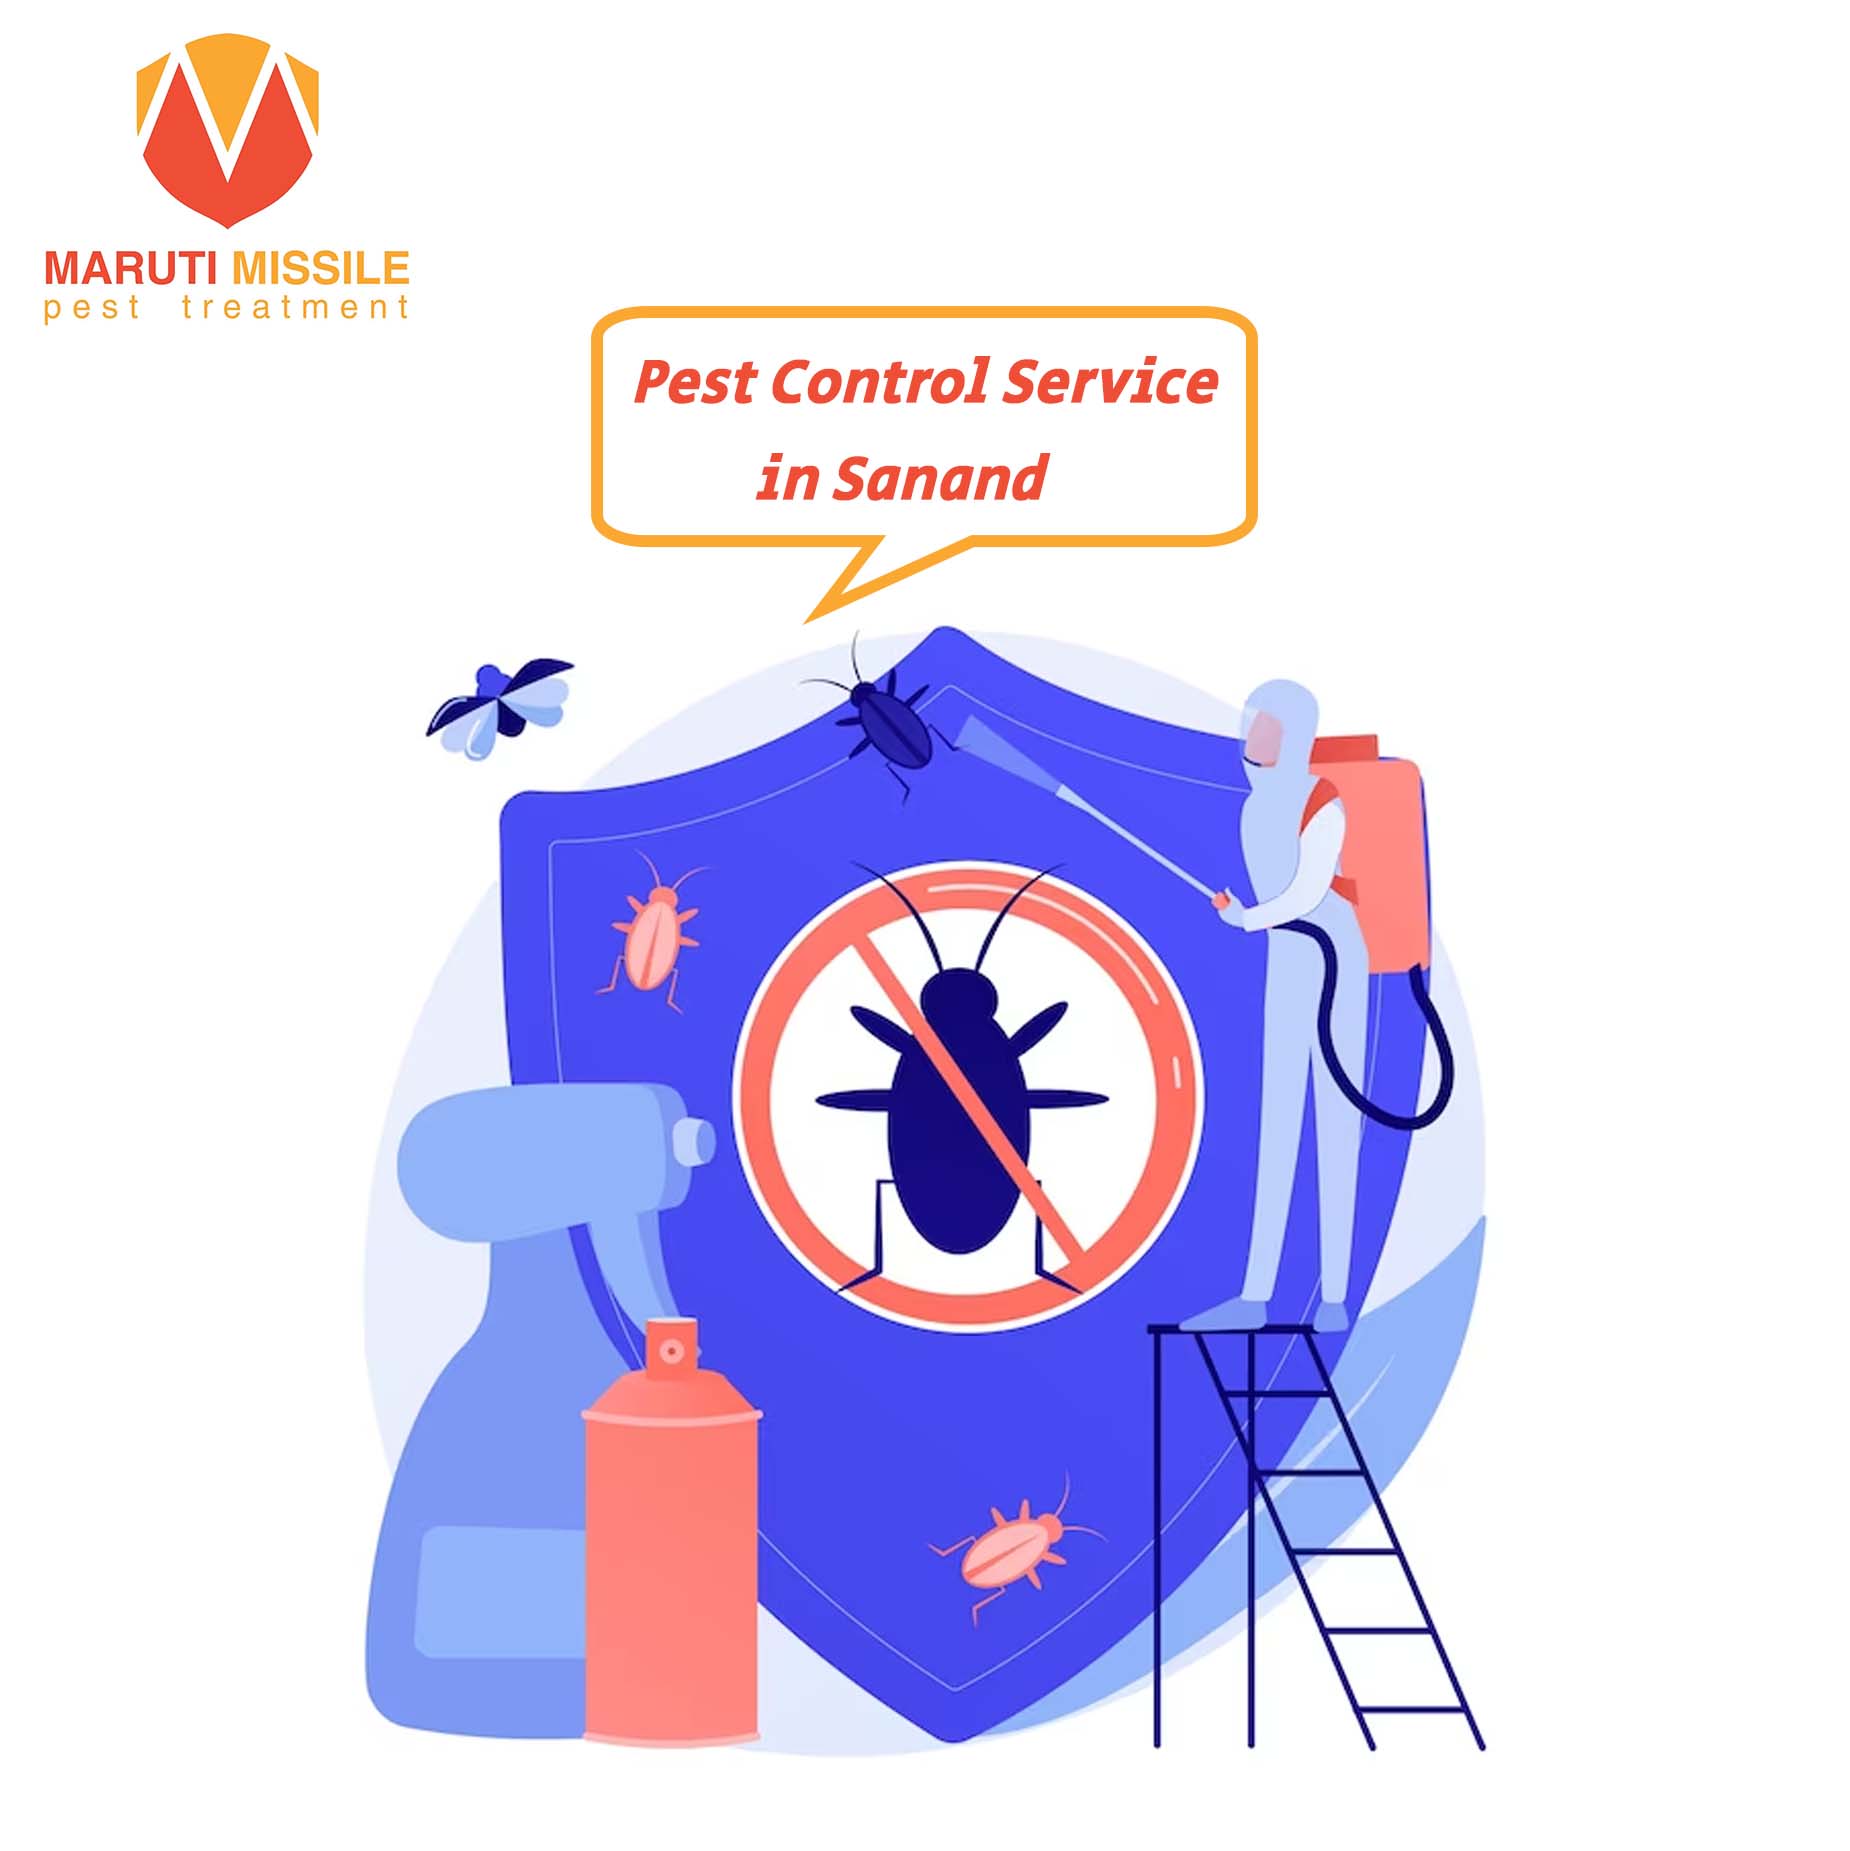 Pest Control Service in Sanand